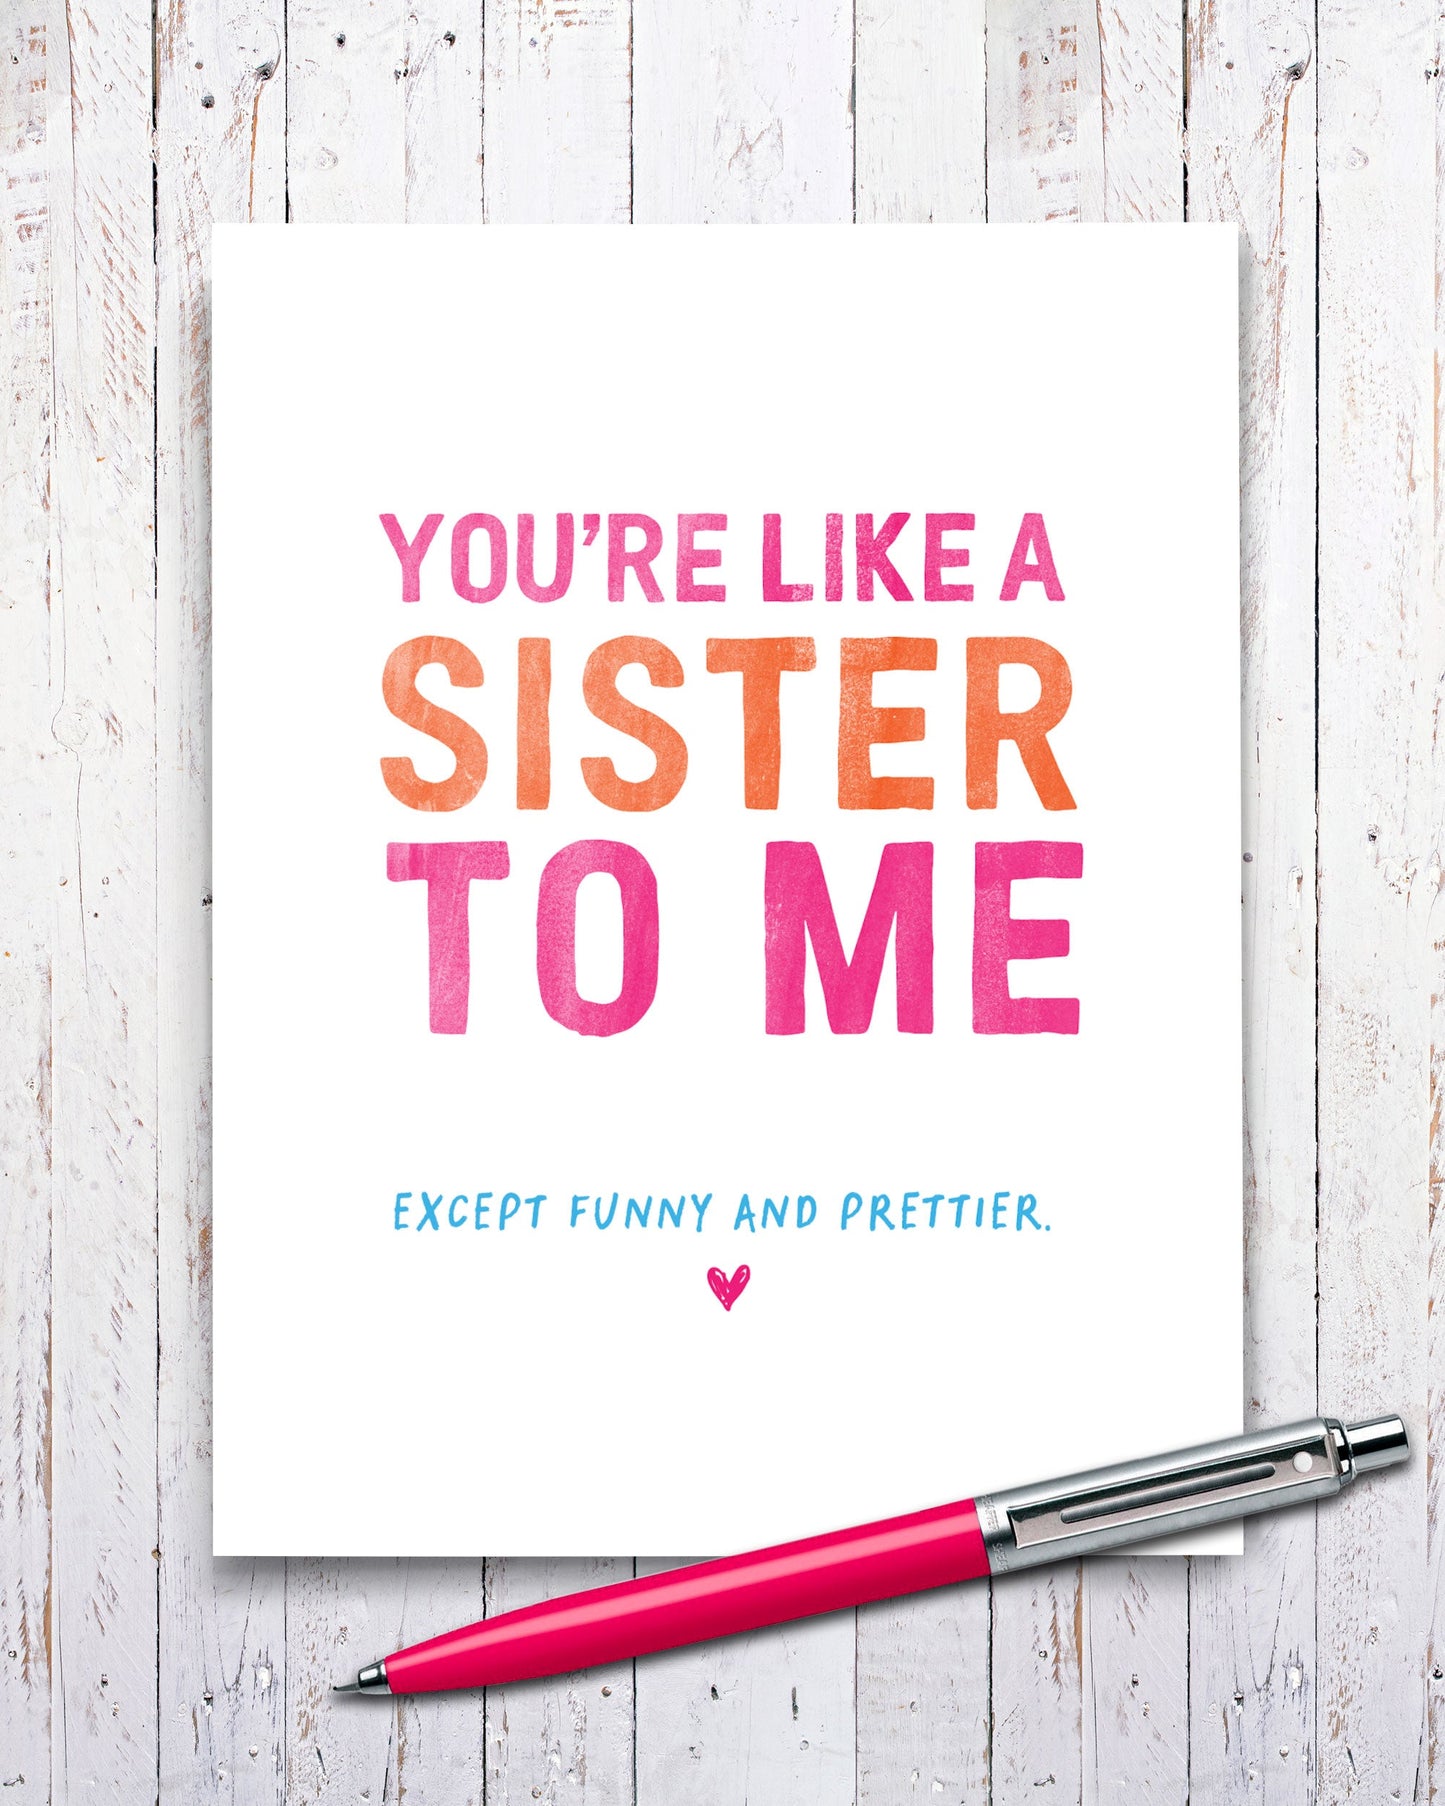 You’re Like a Sister to Me, Funny Greeting Card with pen - Transit Design - Smirkantile